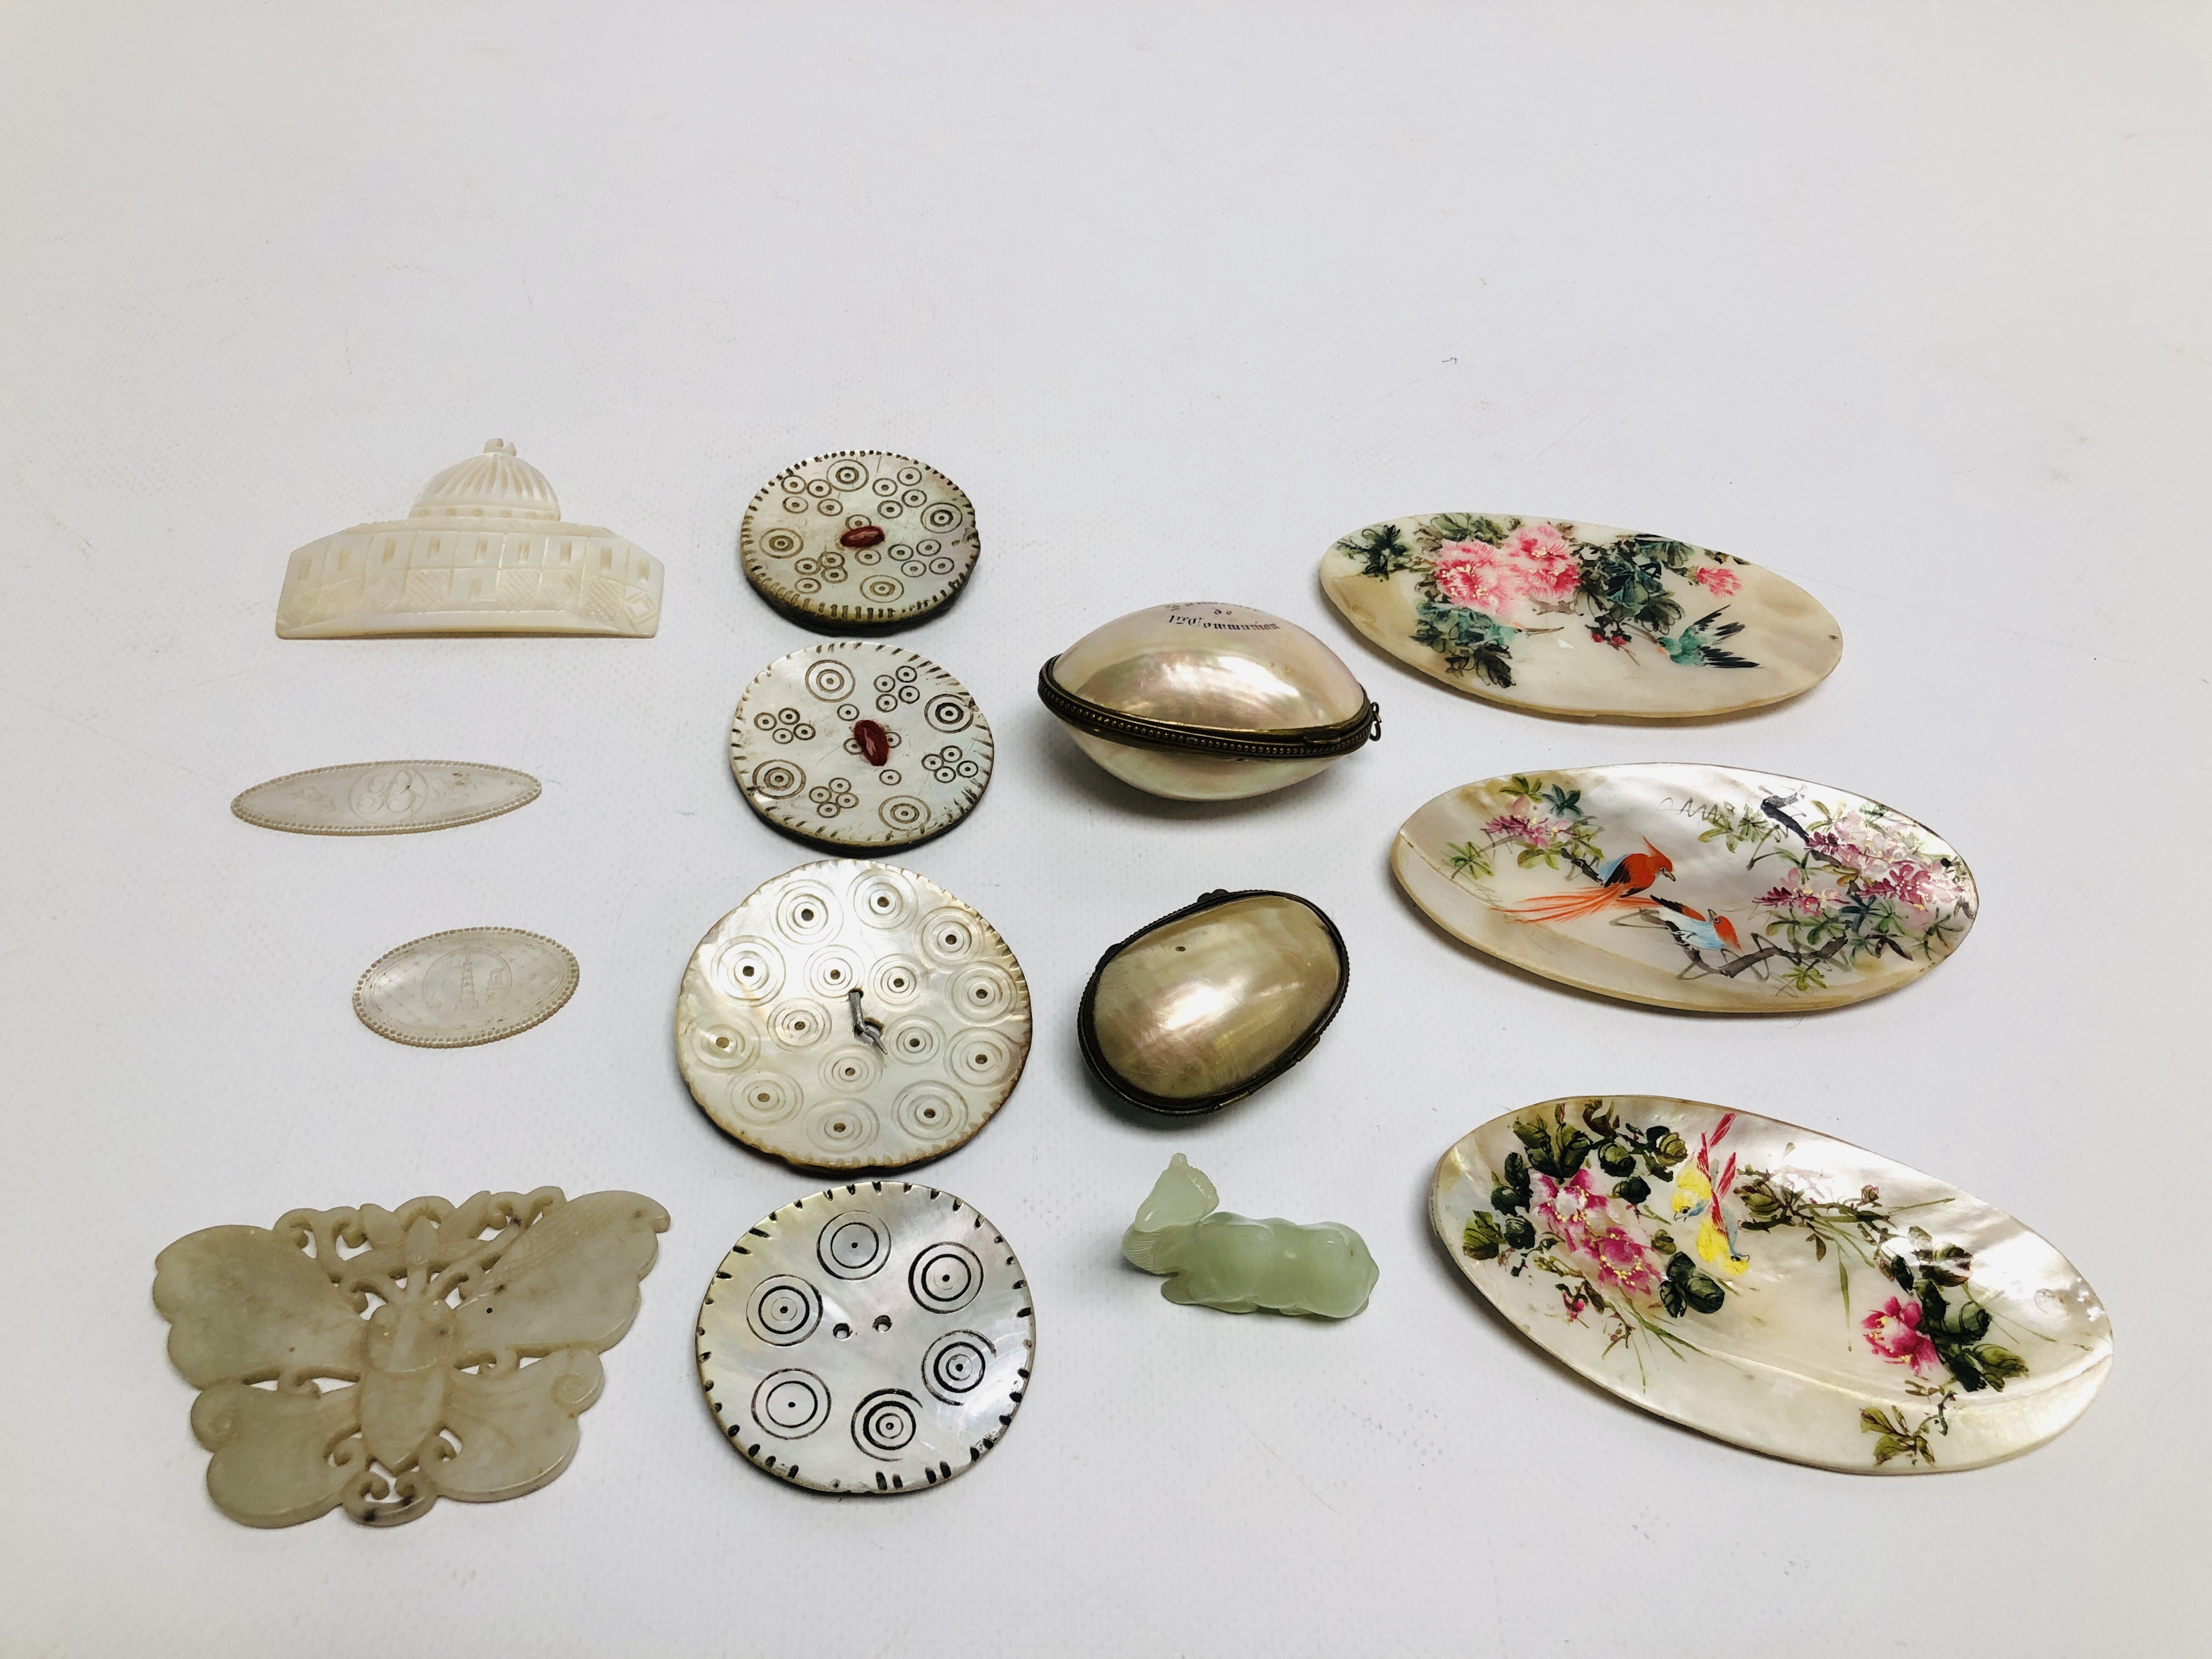 A COLLECTION OF MOTHER OF PEARL COLLECTABLES TO INCLUDE OVER SIZED BUTTONS, ORIENTAL DISKS / PANELS,